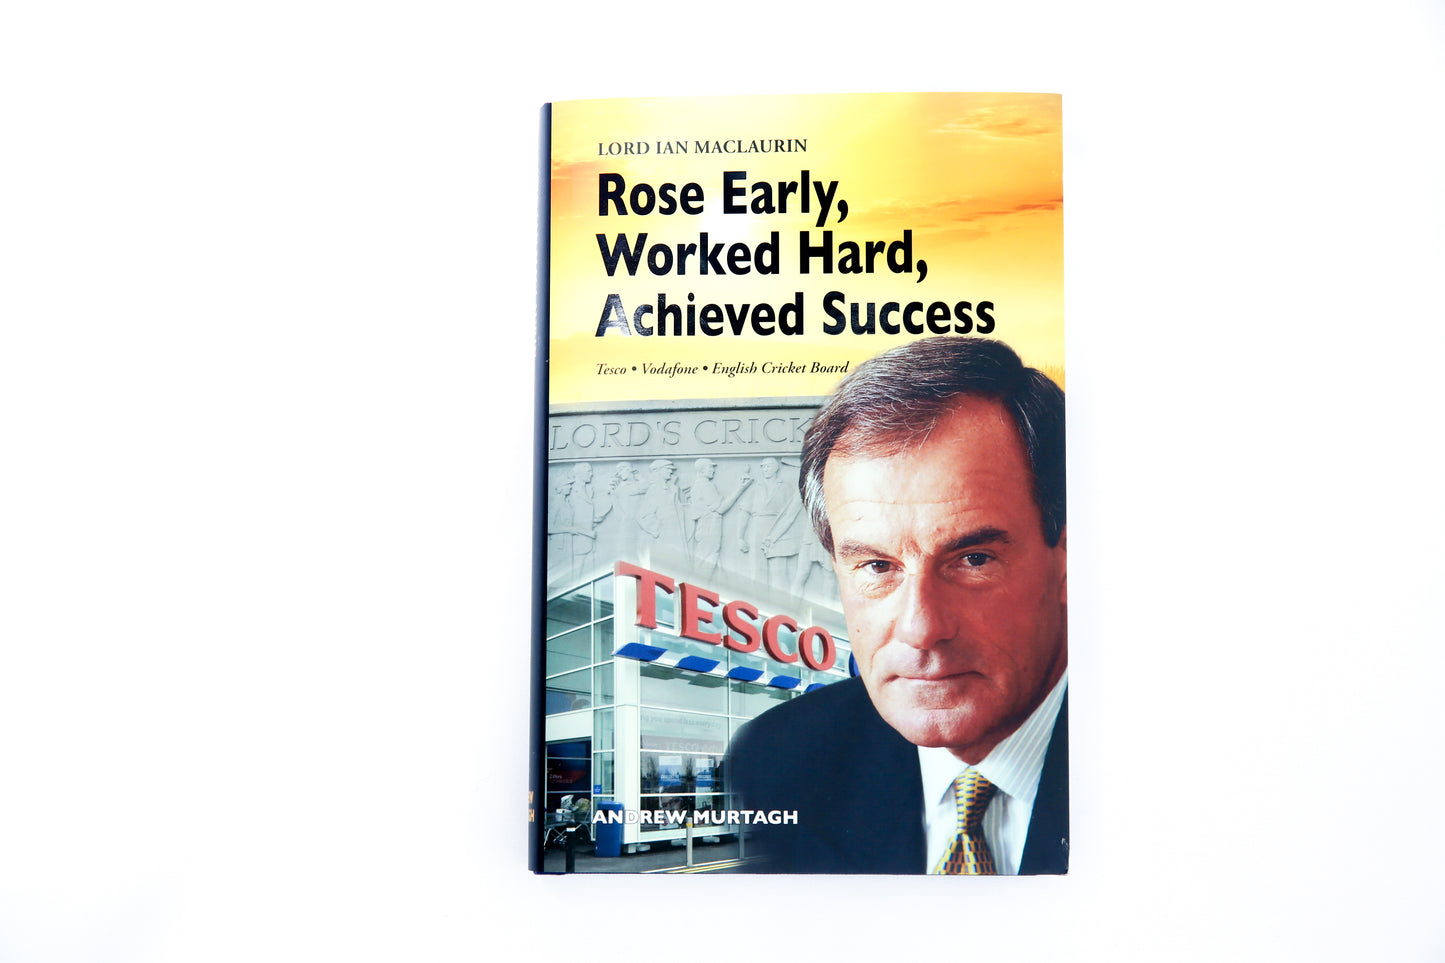 Rose Early, Worked Hard, Achieved Success by Lord Ian MacLaurin